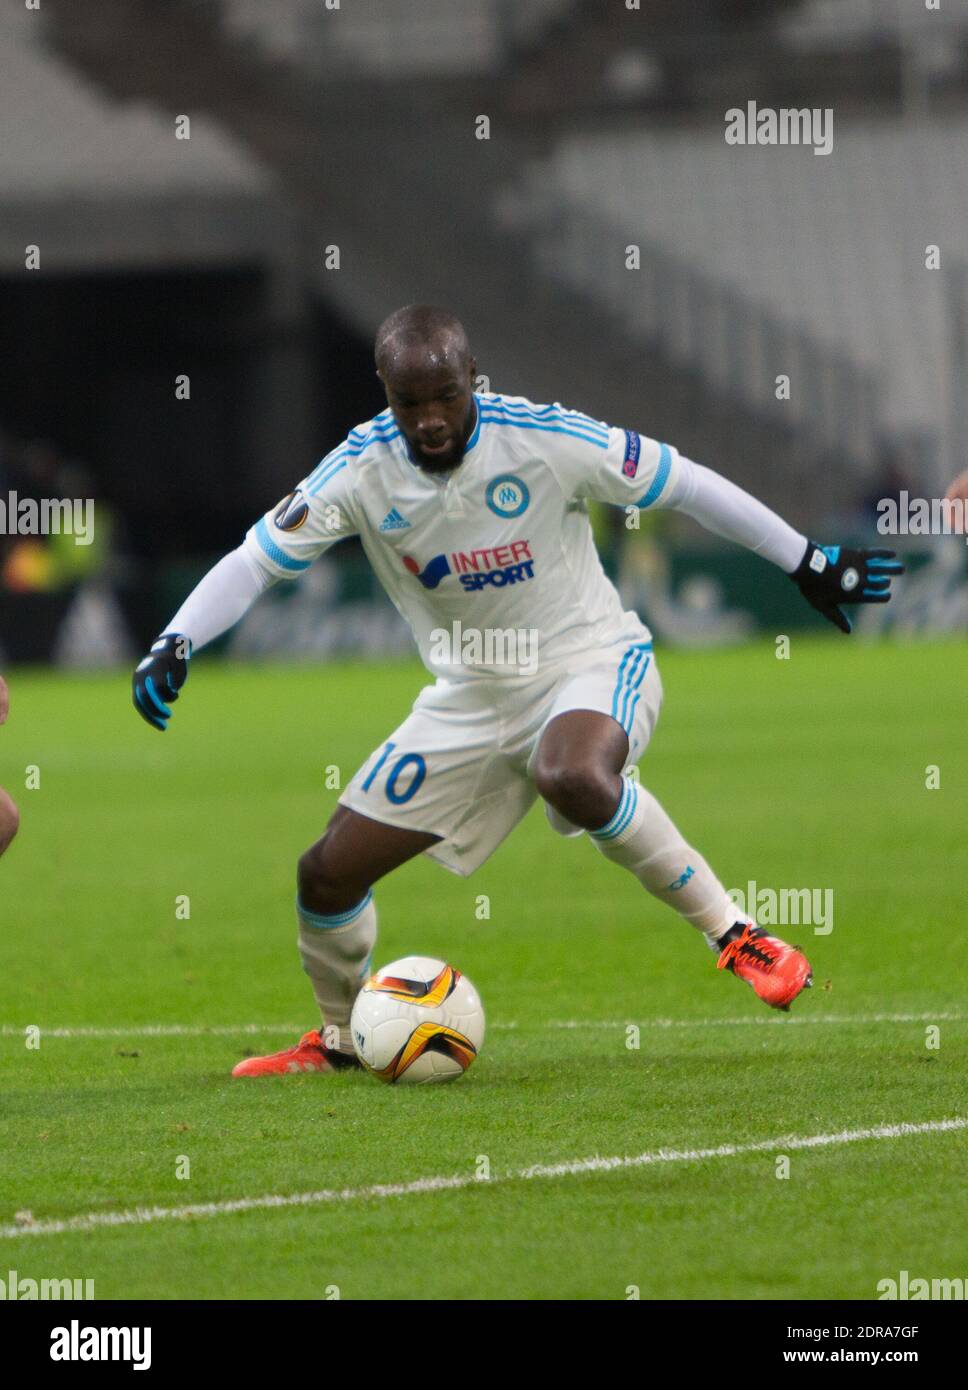 Marseille's Lassana Diarra during the UEFA Europa League Group F soccer match, Olympique de Marseille Vs FC Groningen at Stade Vélodrome in Marseille, France on November 27th, 2015. Photo by Guillaume Chagnard/ABACAPRESS.COM Stock Photo